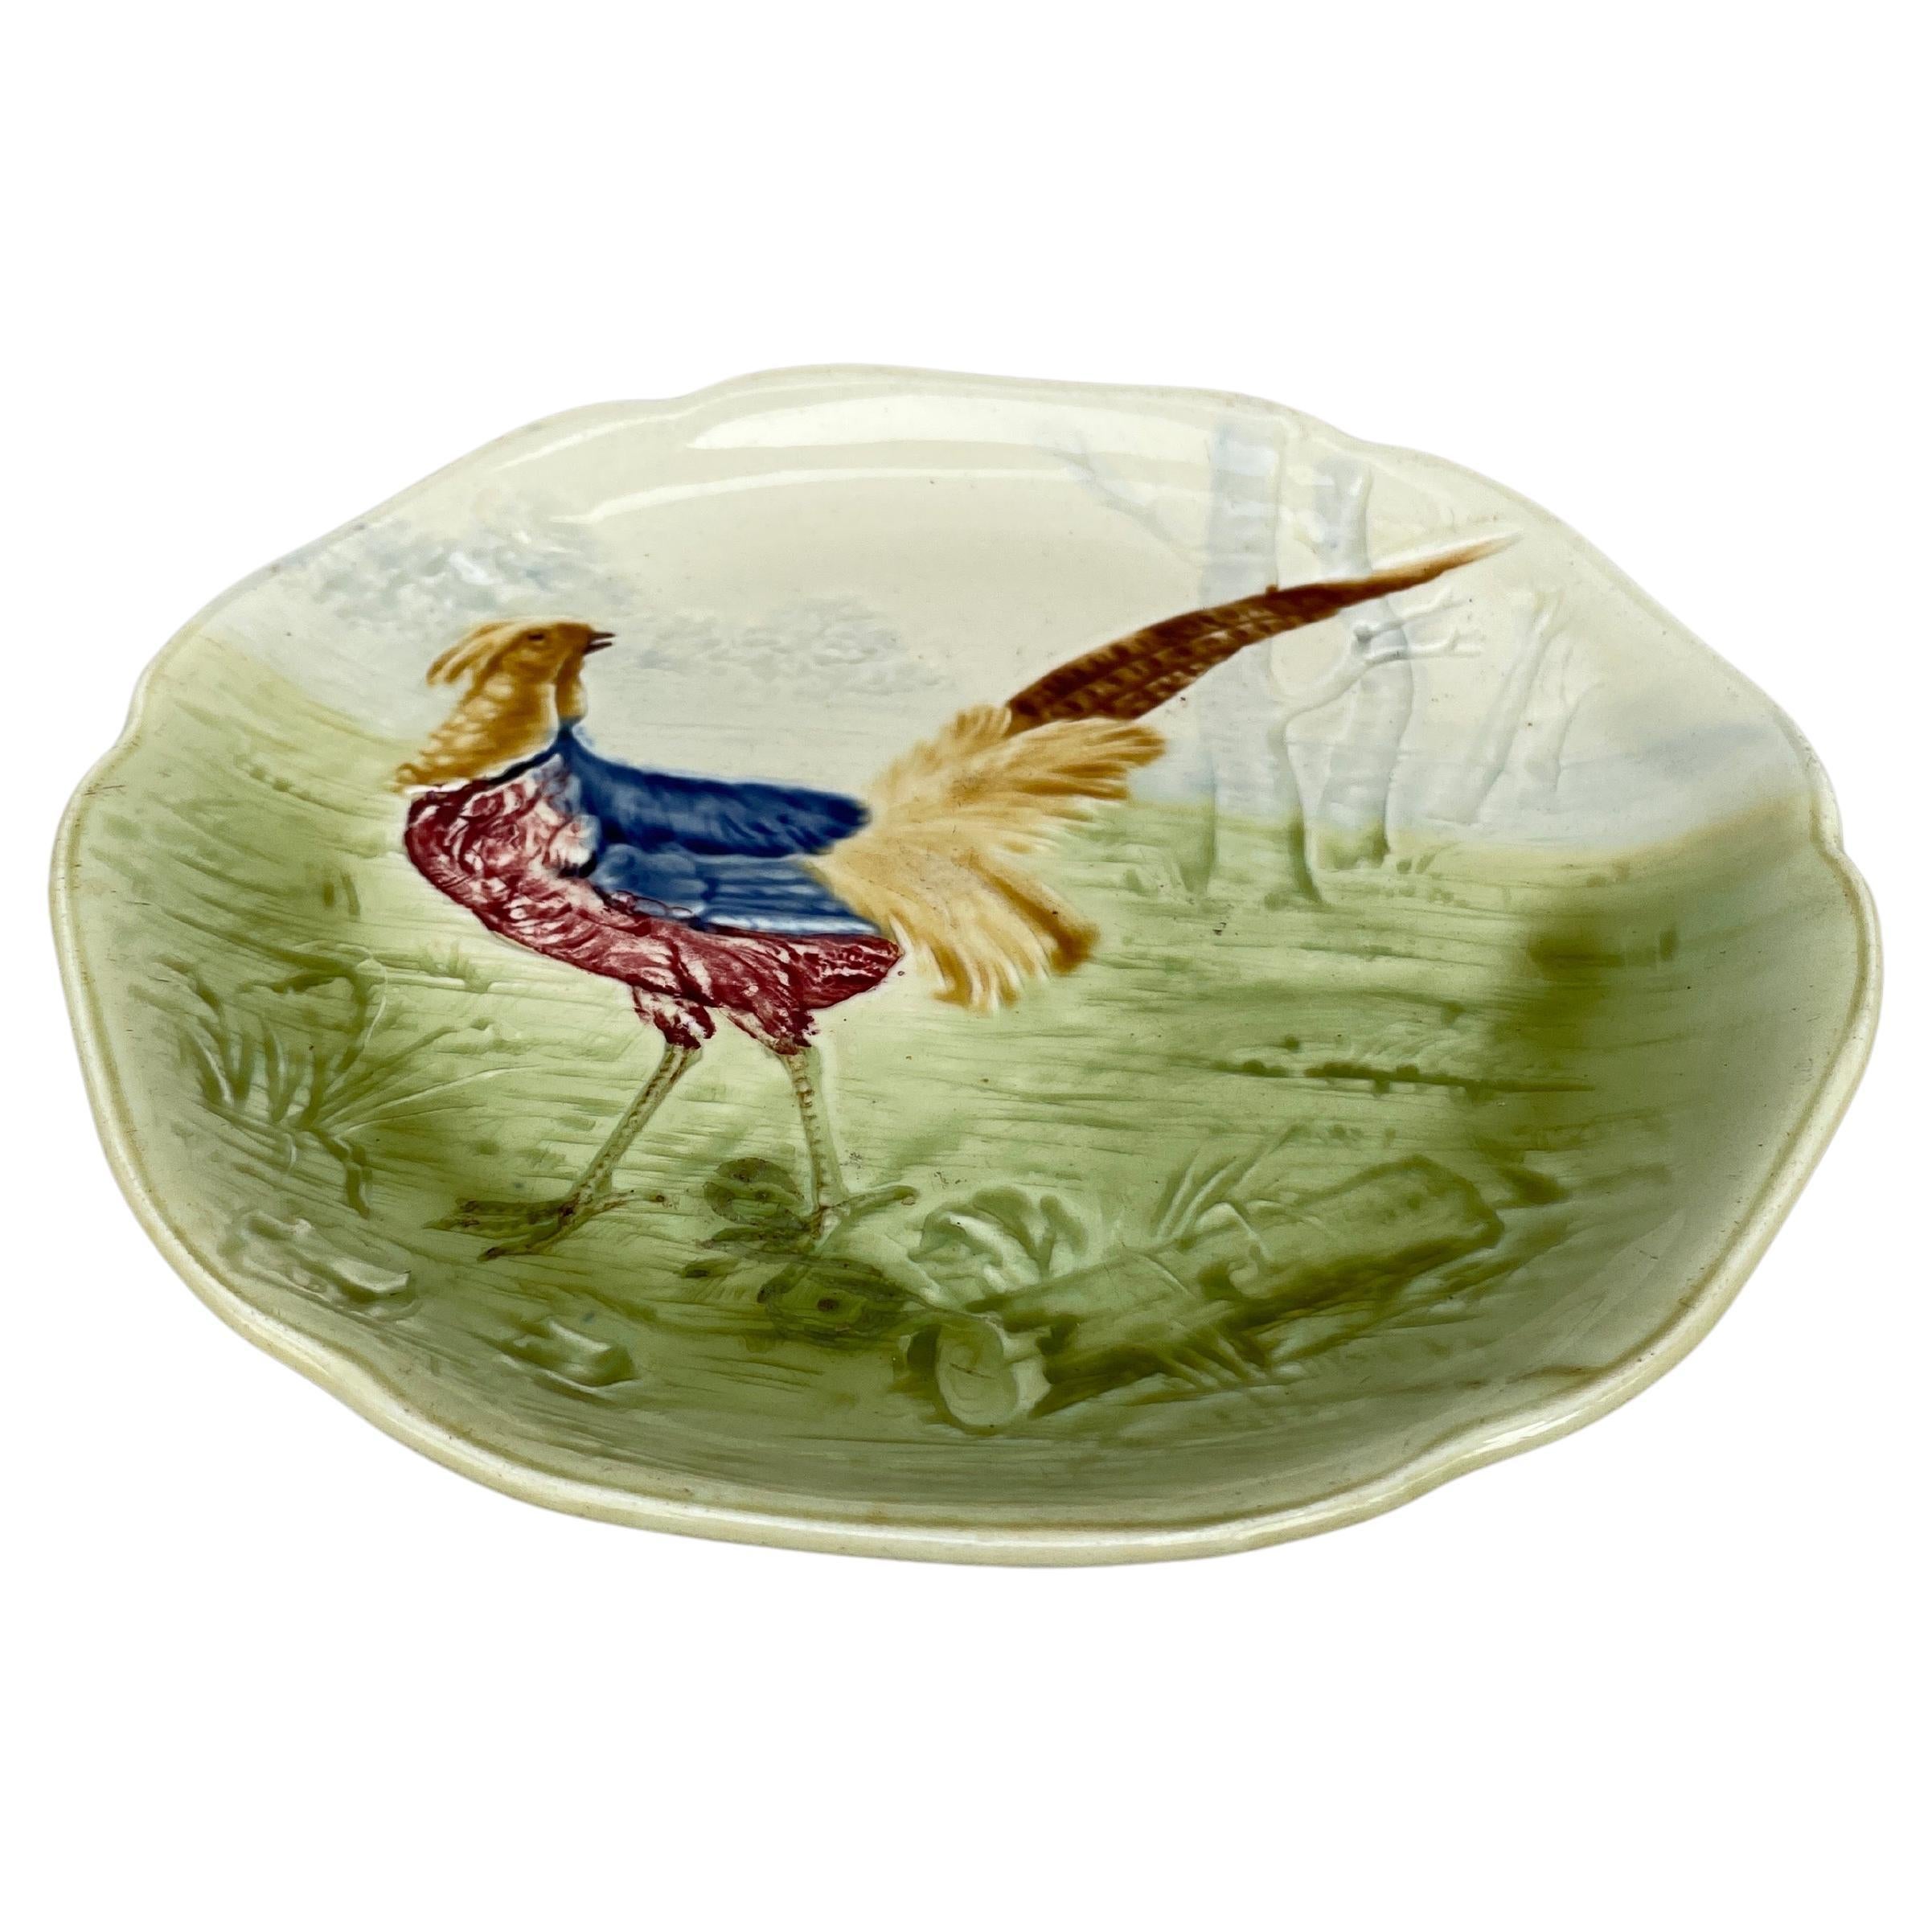 Majolica plate with a pheasant in the woods signed Hippolyte Boulenger Choisy le Roi, circa 1890.
The manufacture of Choisy le Roi was one of the most important manufacture at the end of 19th century, they produced very high quality ceramics of all